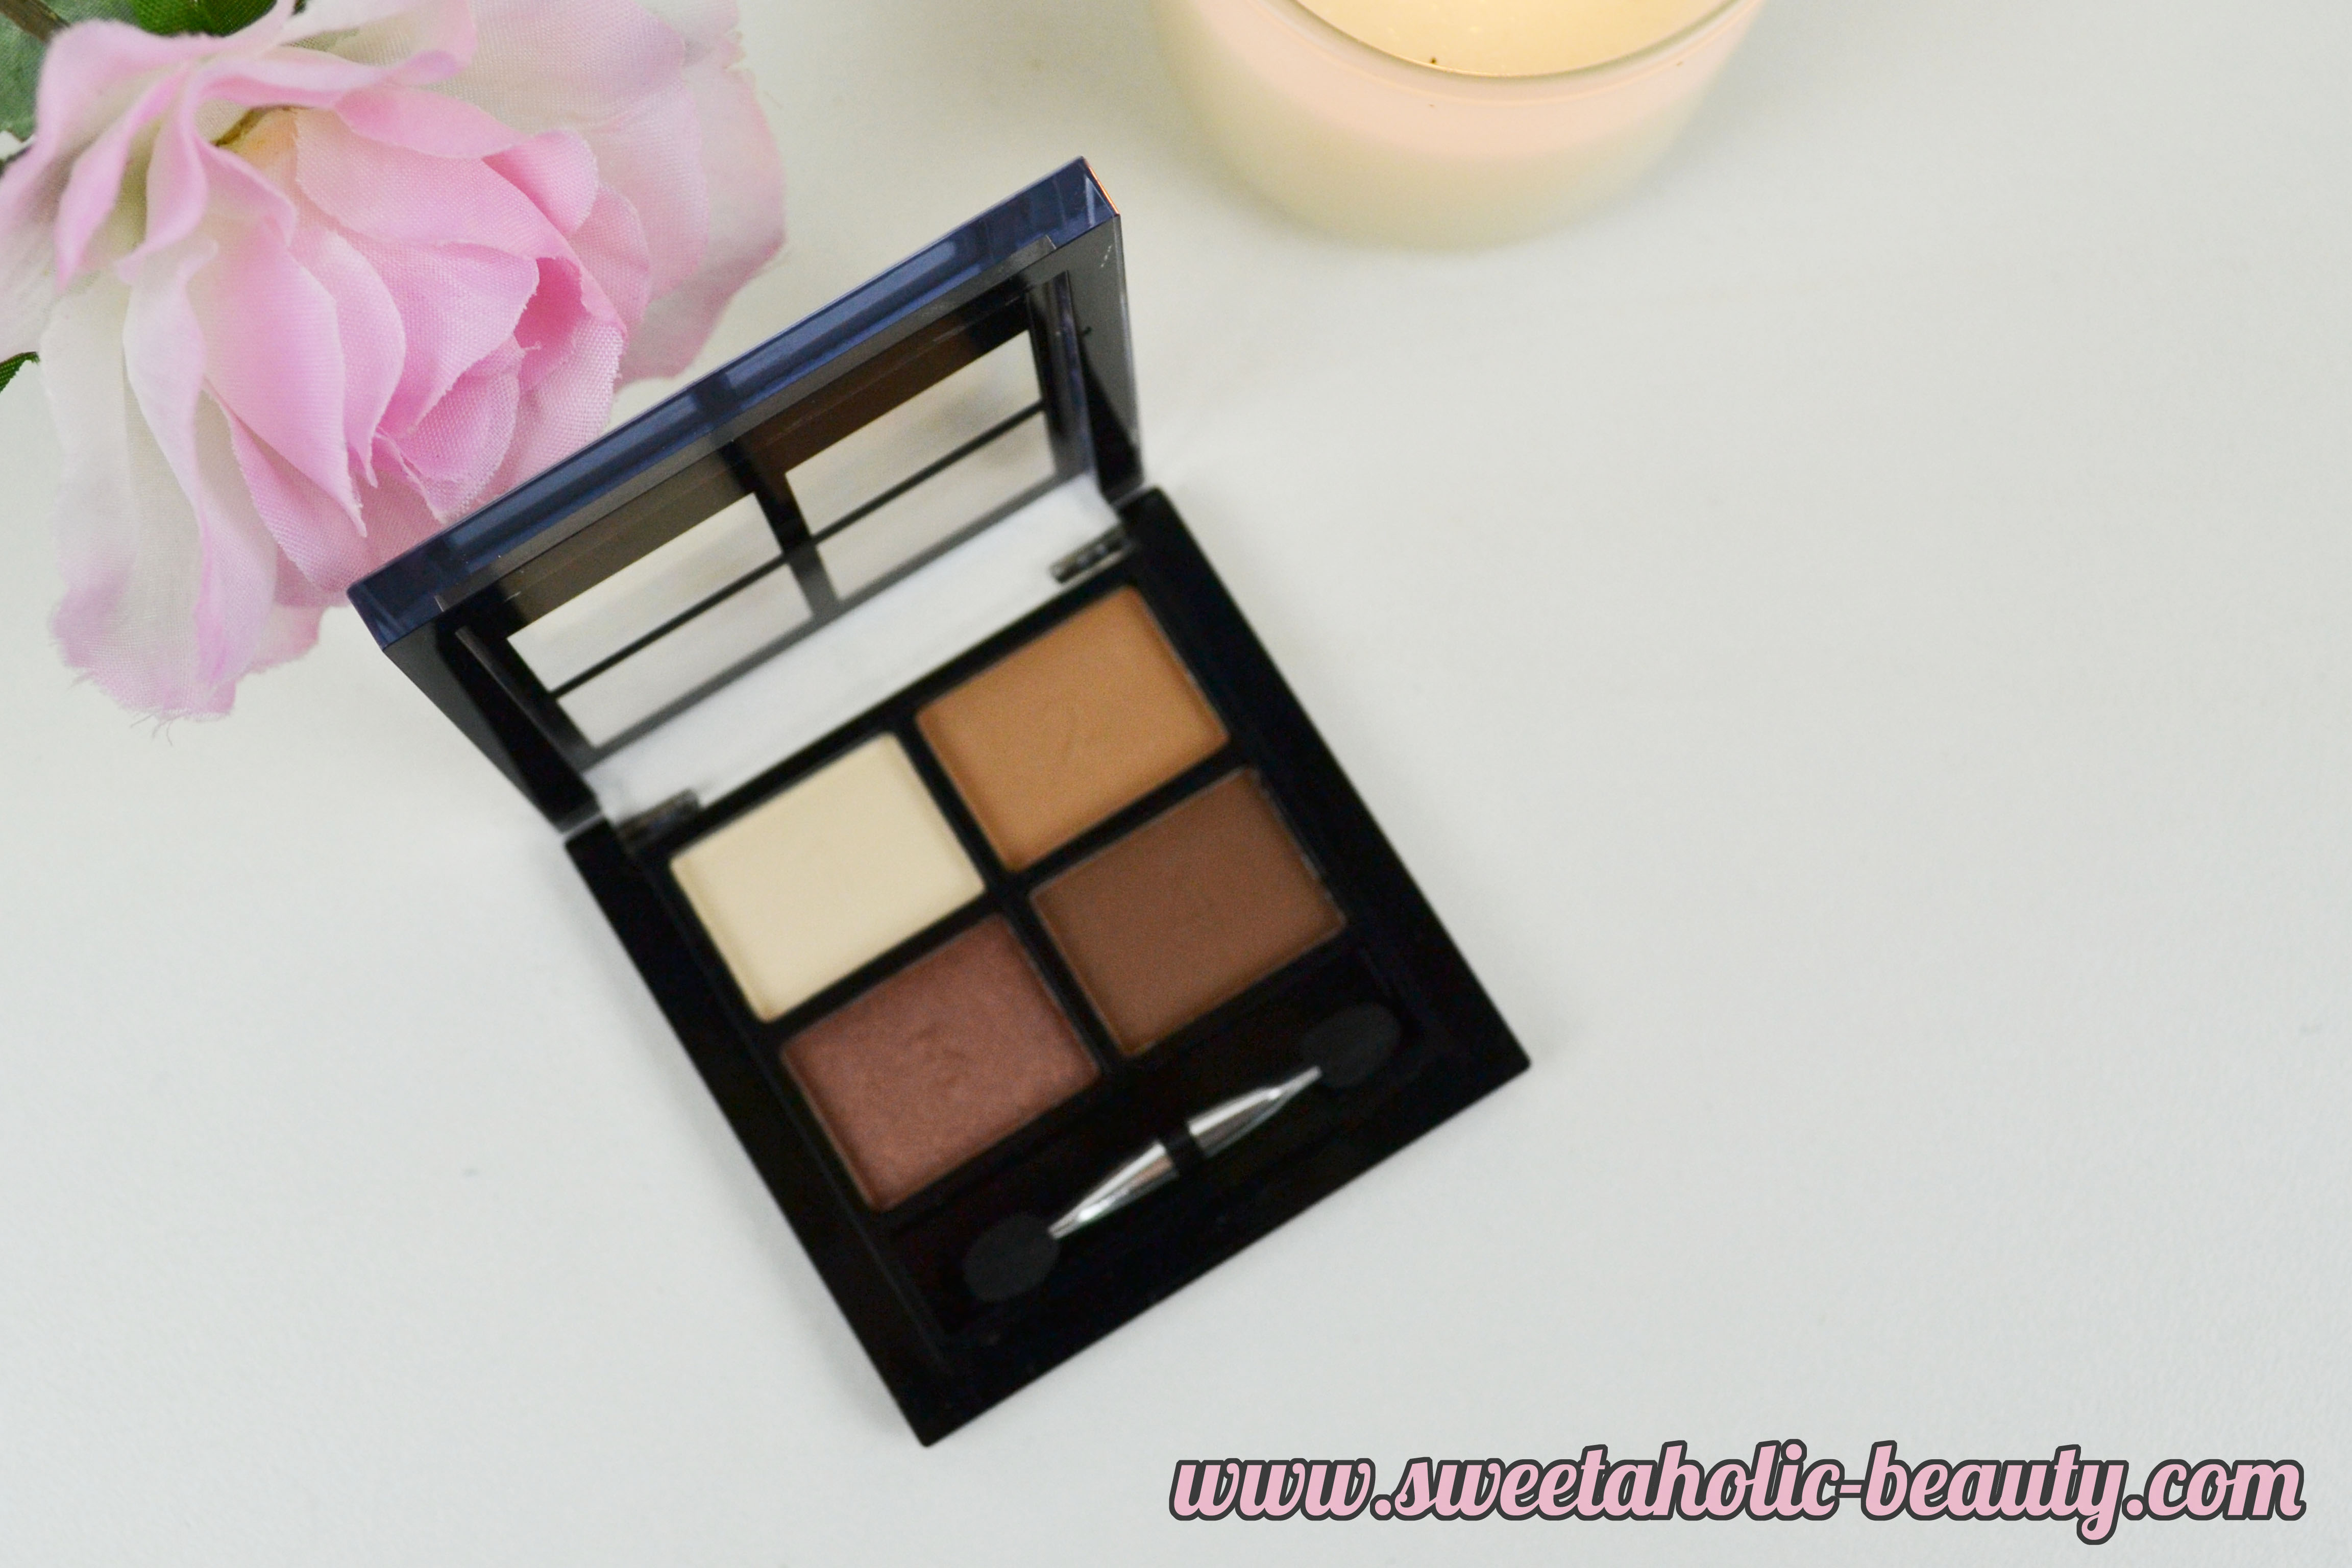 DB Cosmetics Brand Focus Review & Swatches - Sweetaholic Beauty